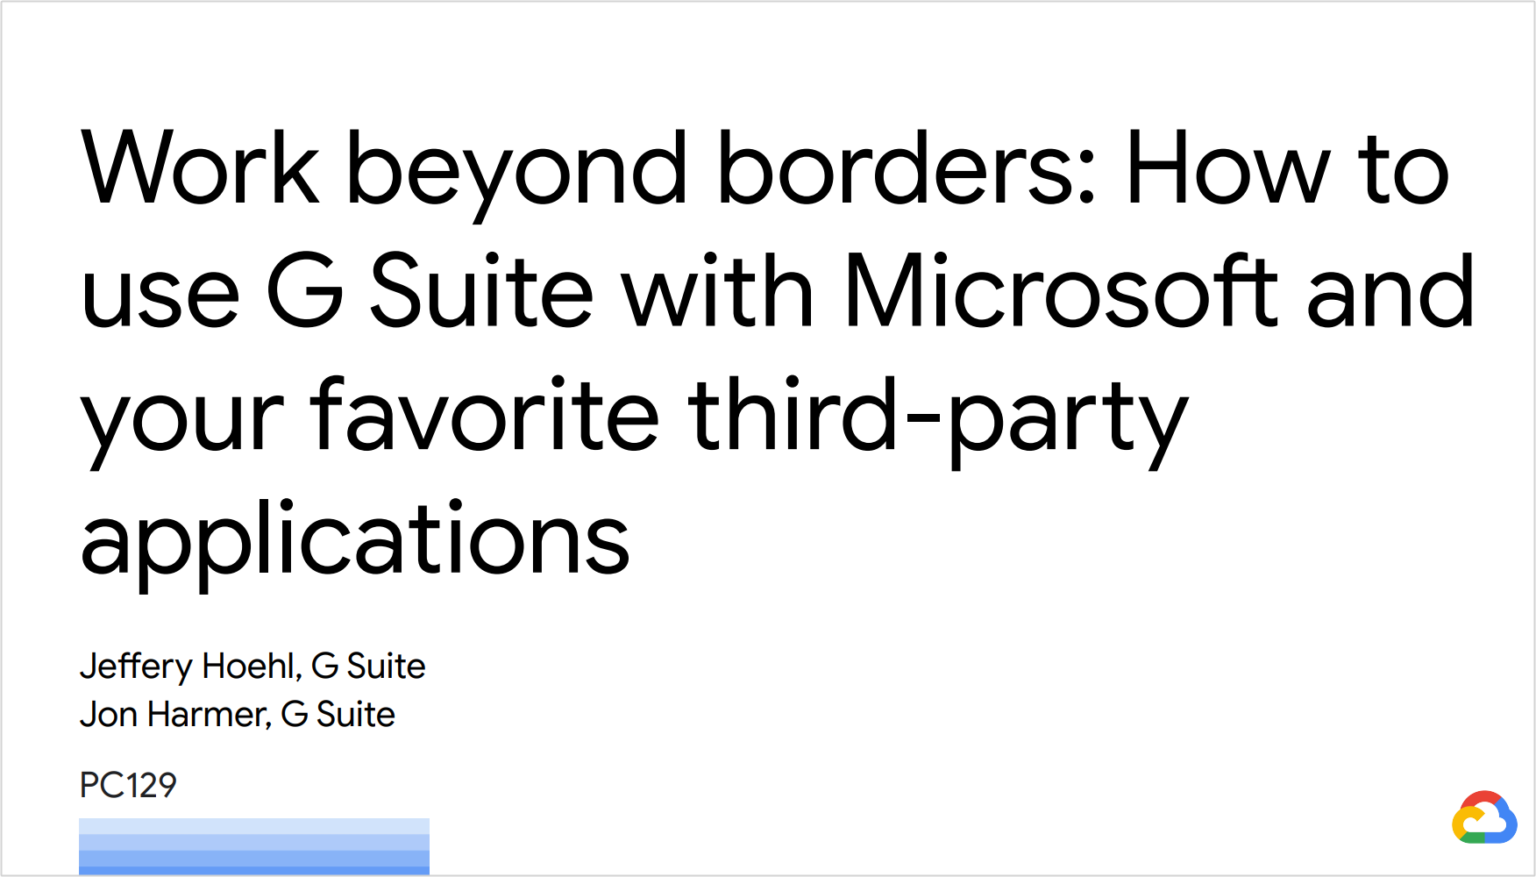 Work Beyond Borders: How to Use G Suite with Microsoft and Your Favorite Third-Party Applications